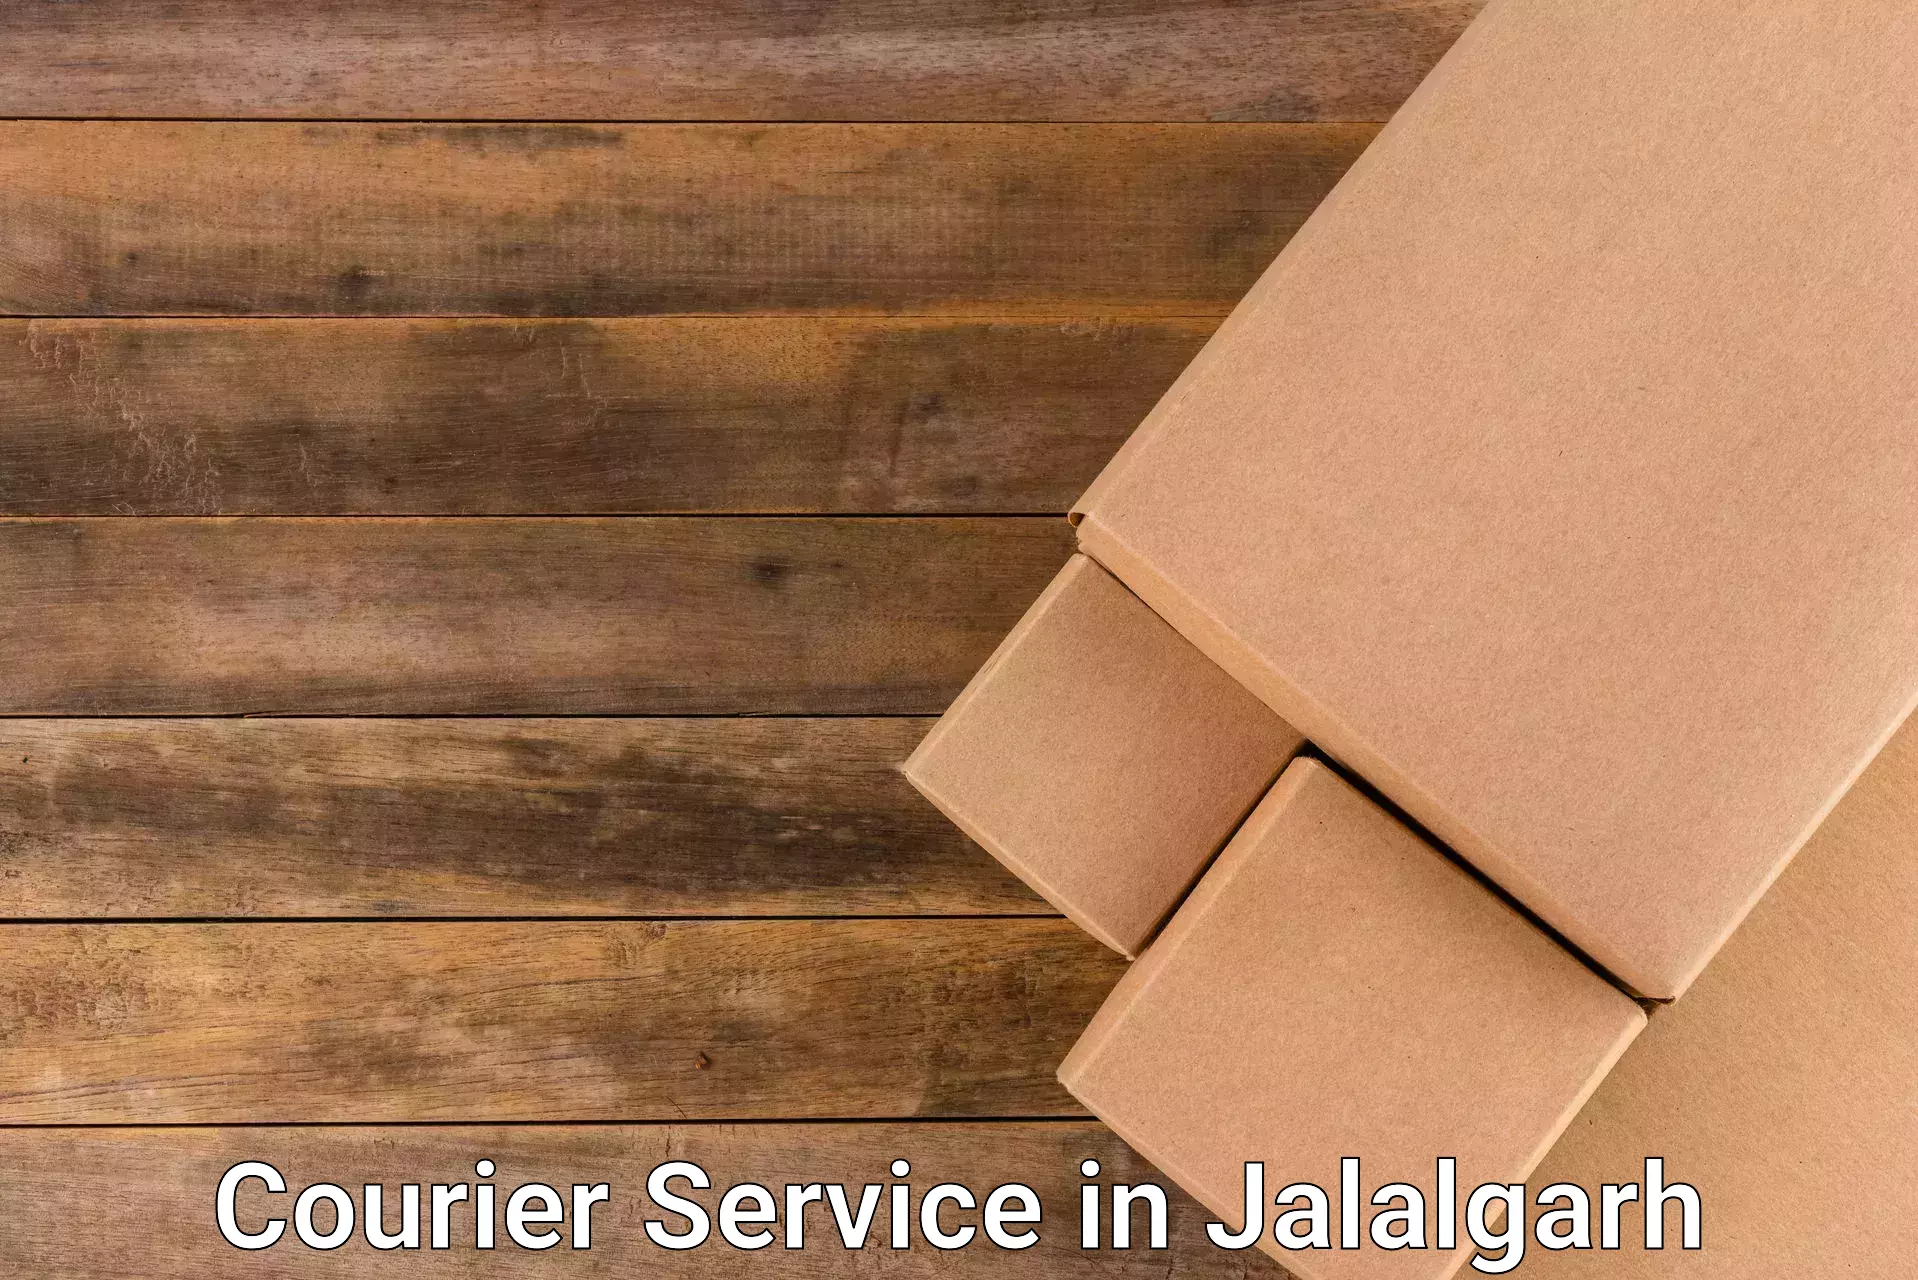 Next-day freight services in Jalalgarh